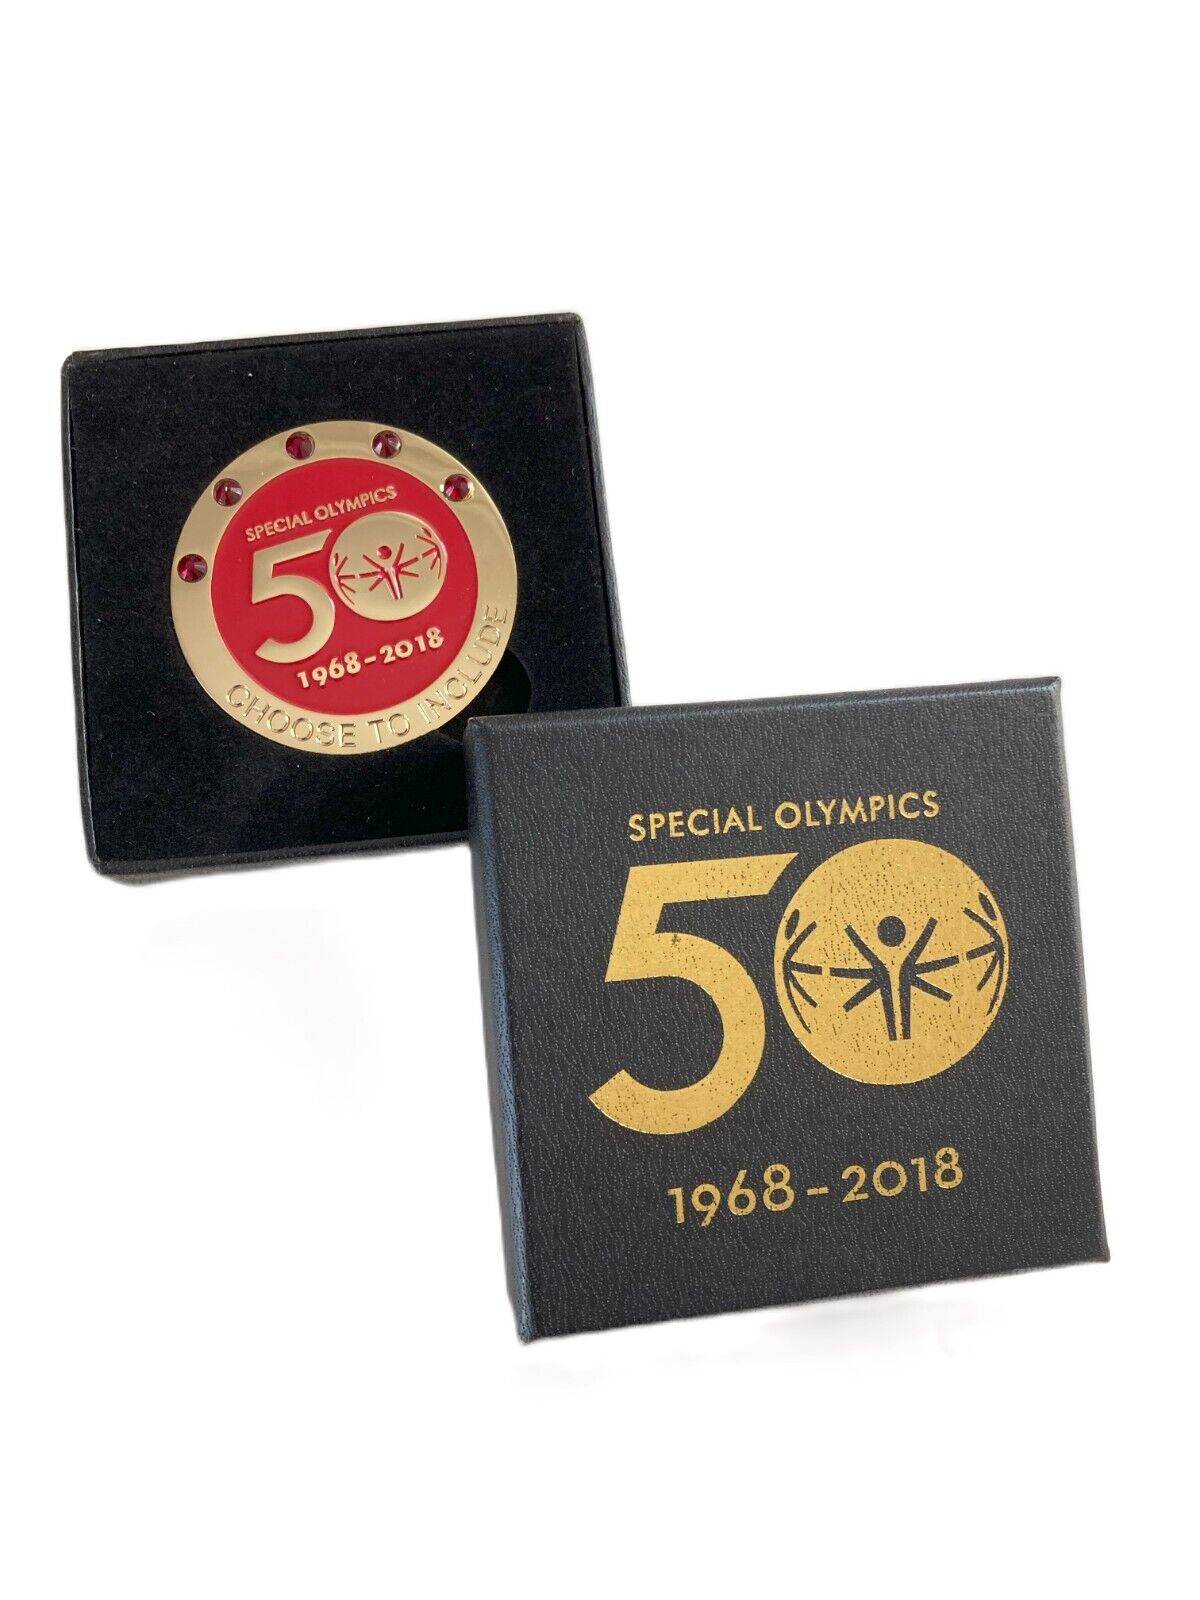 Special Olympics 50th Anniversary Challenge Coin Solider Field Chicago with Box